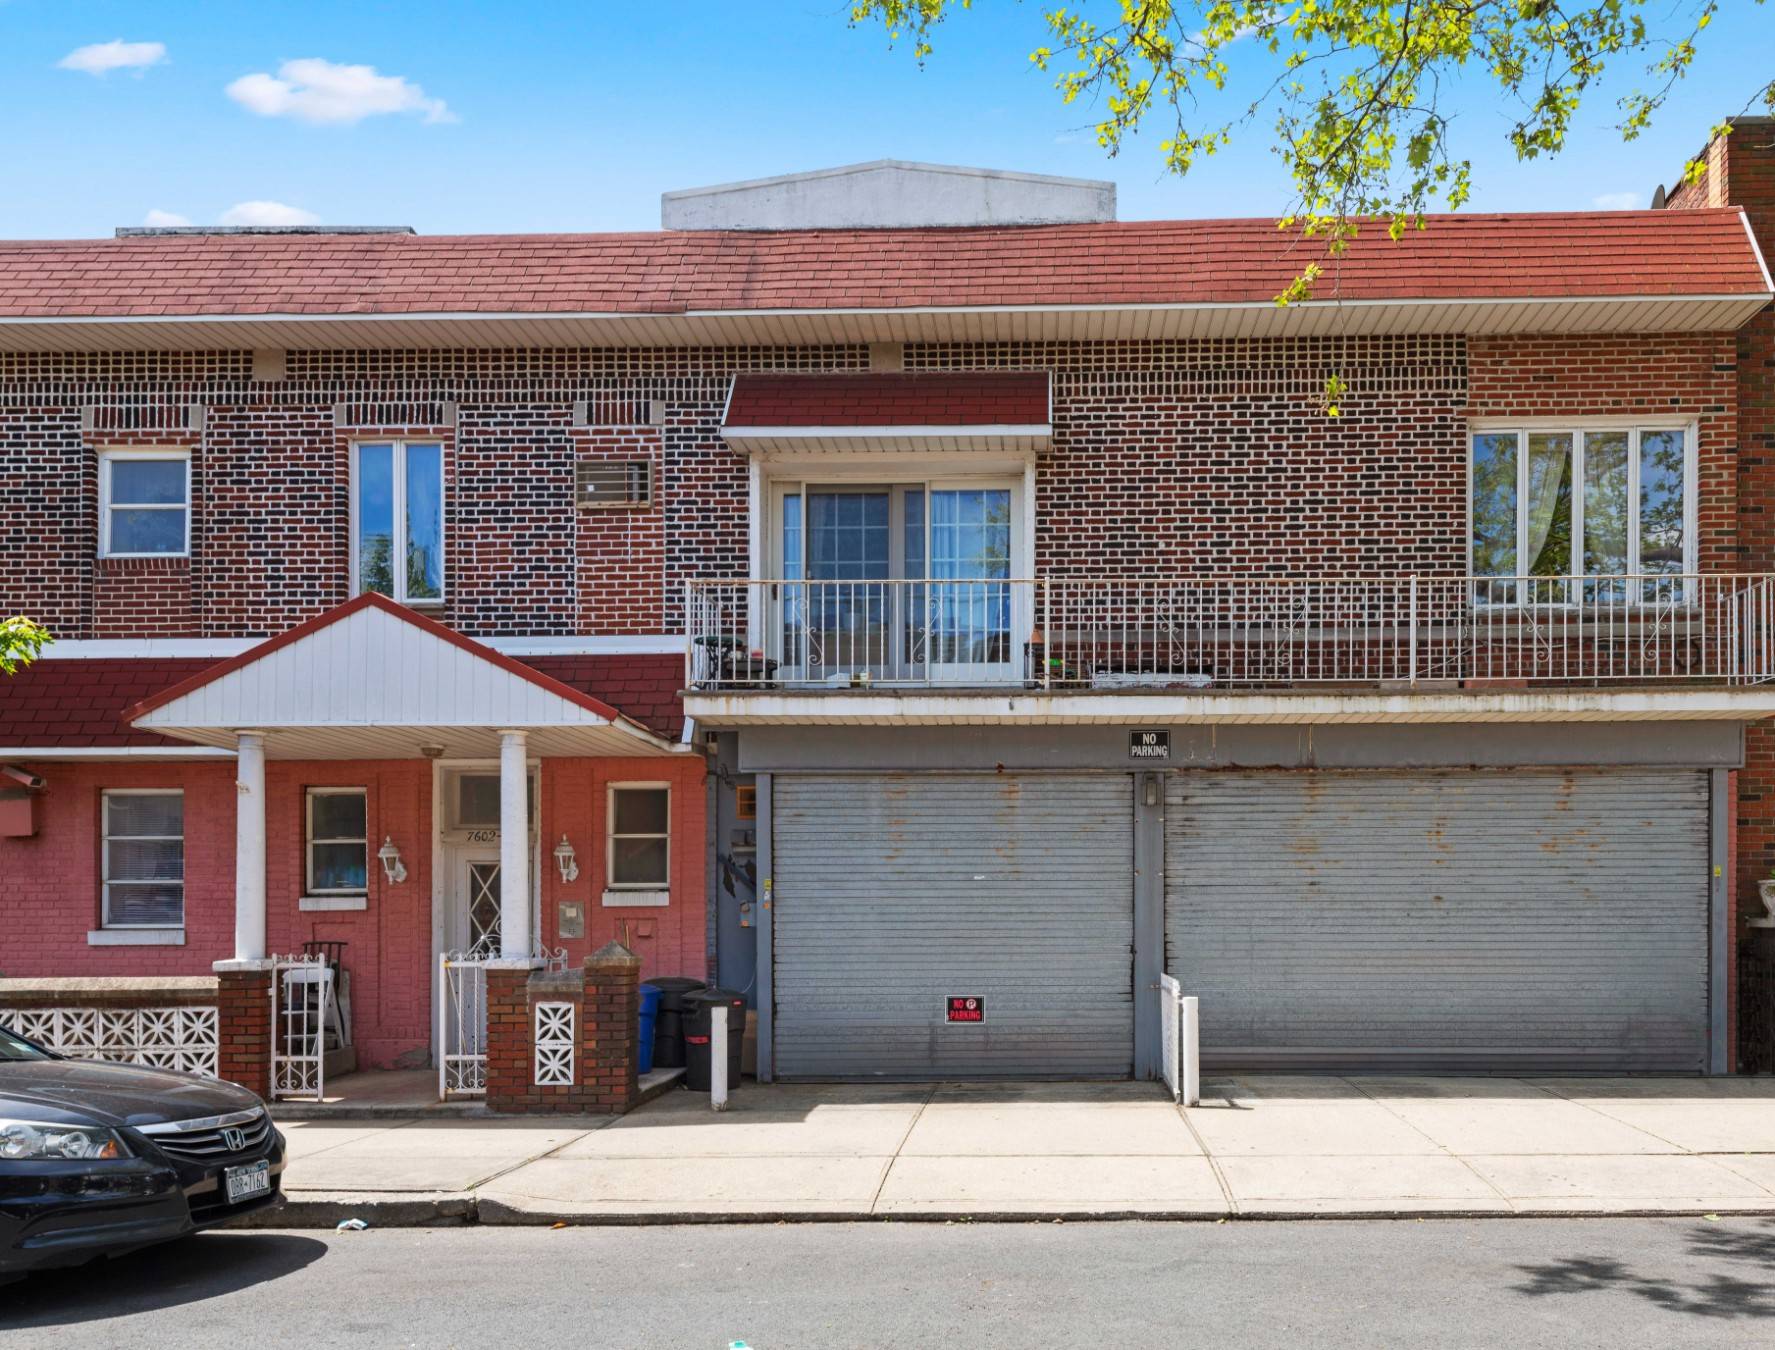 Rare and unique opportunity to own a corner property on the border of Dyker Heights and Bensonhurst.